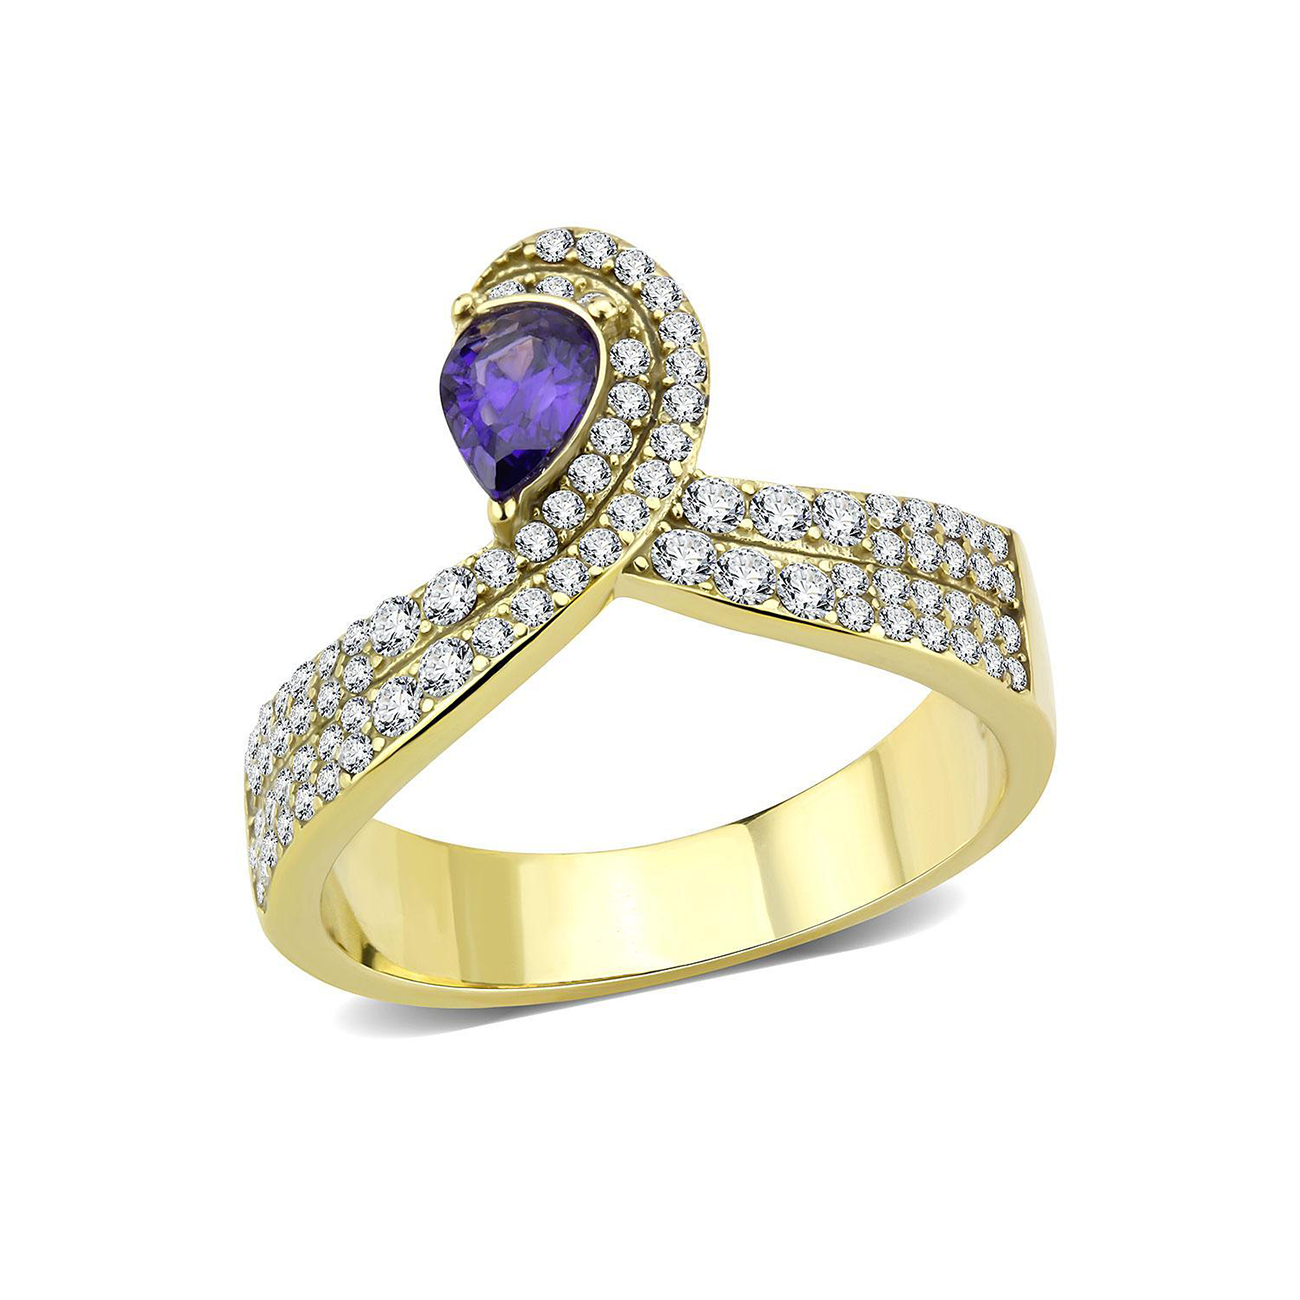 Lavender Passion - Beautiful Purple Color and Pear Shaped Stone Stainless Steel Ring